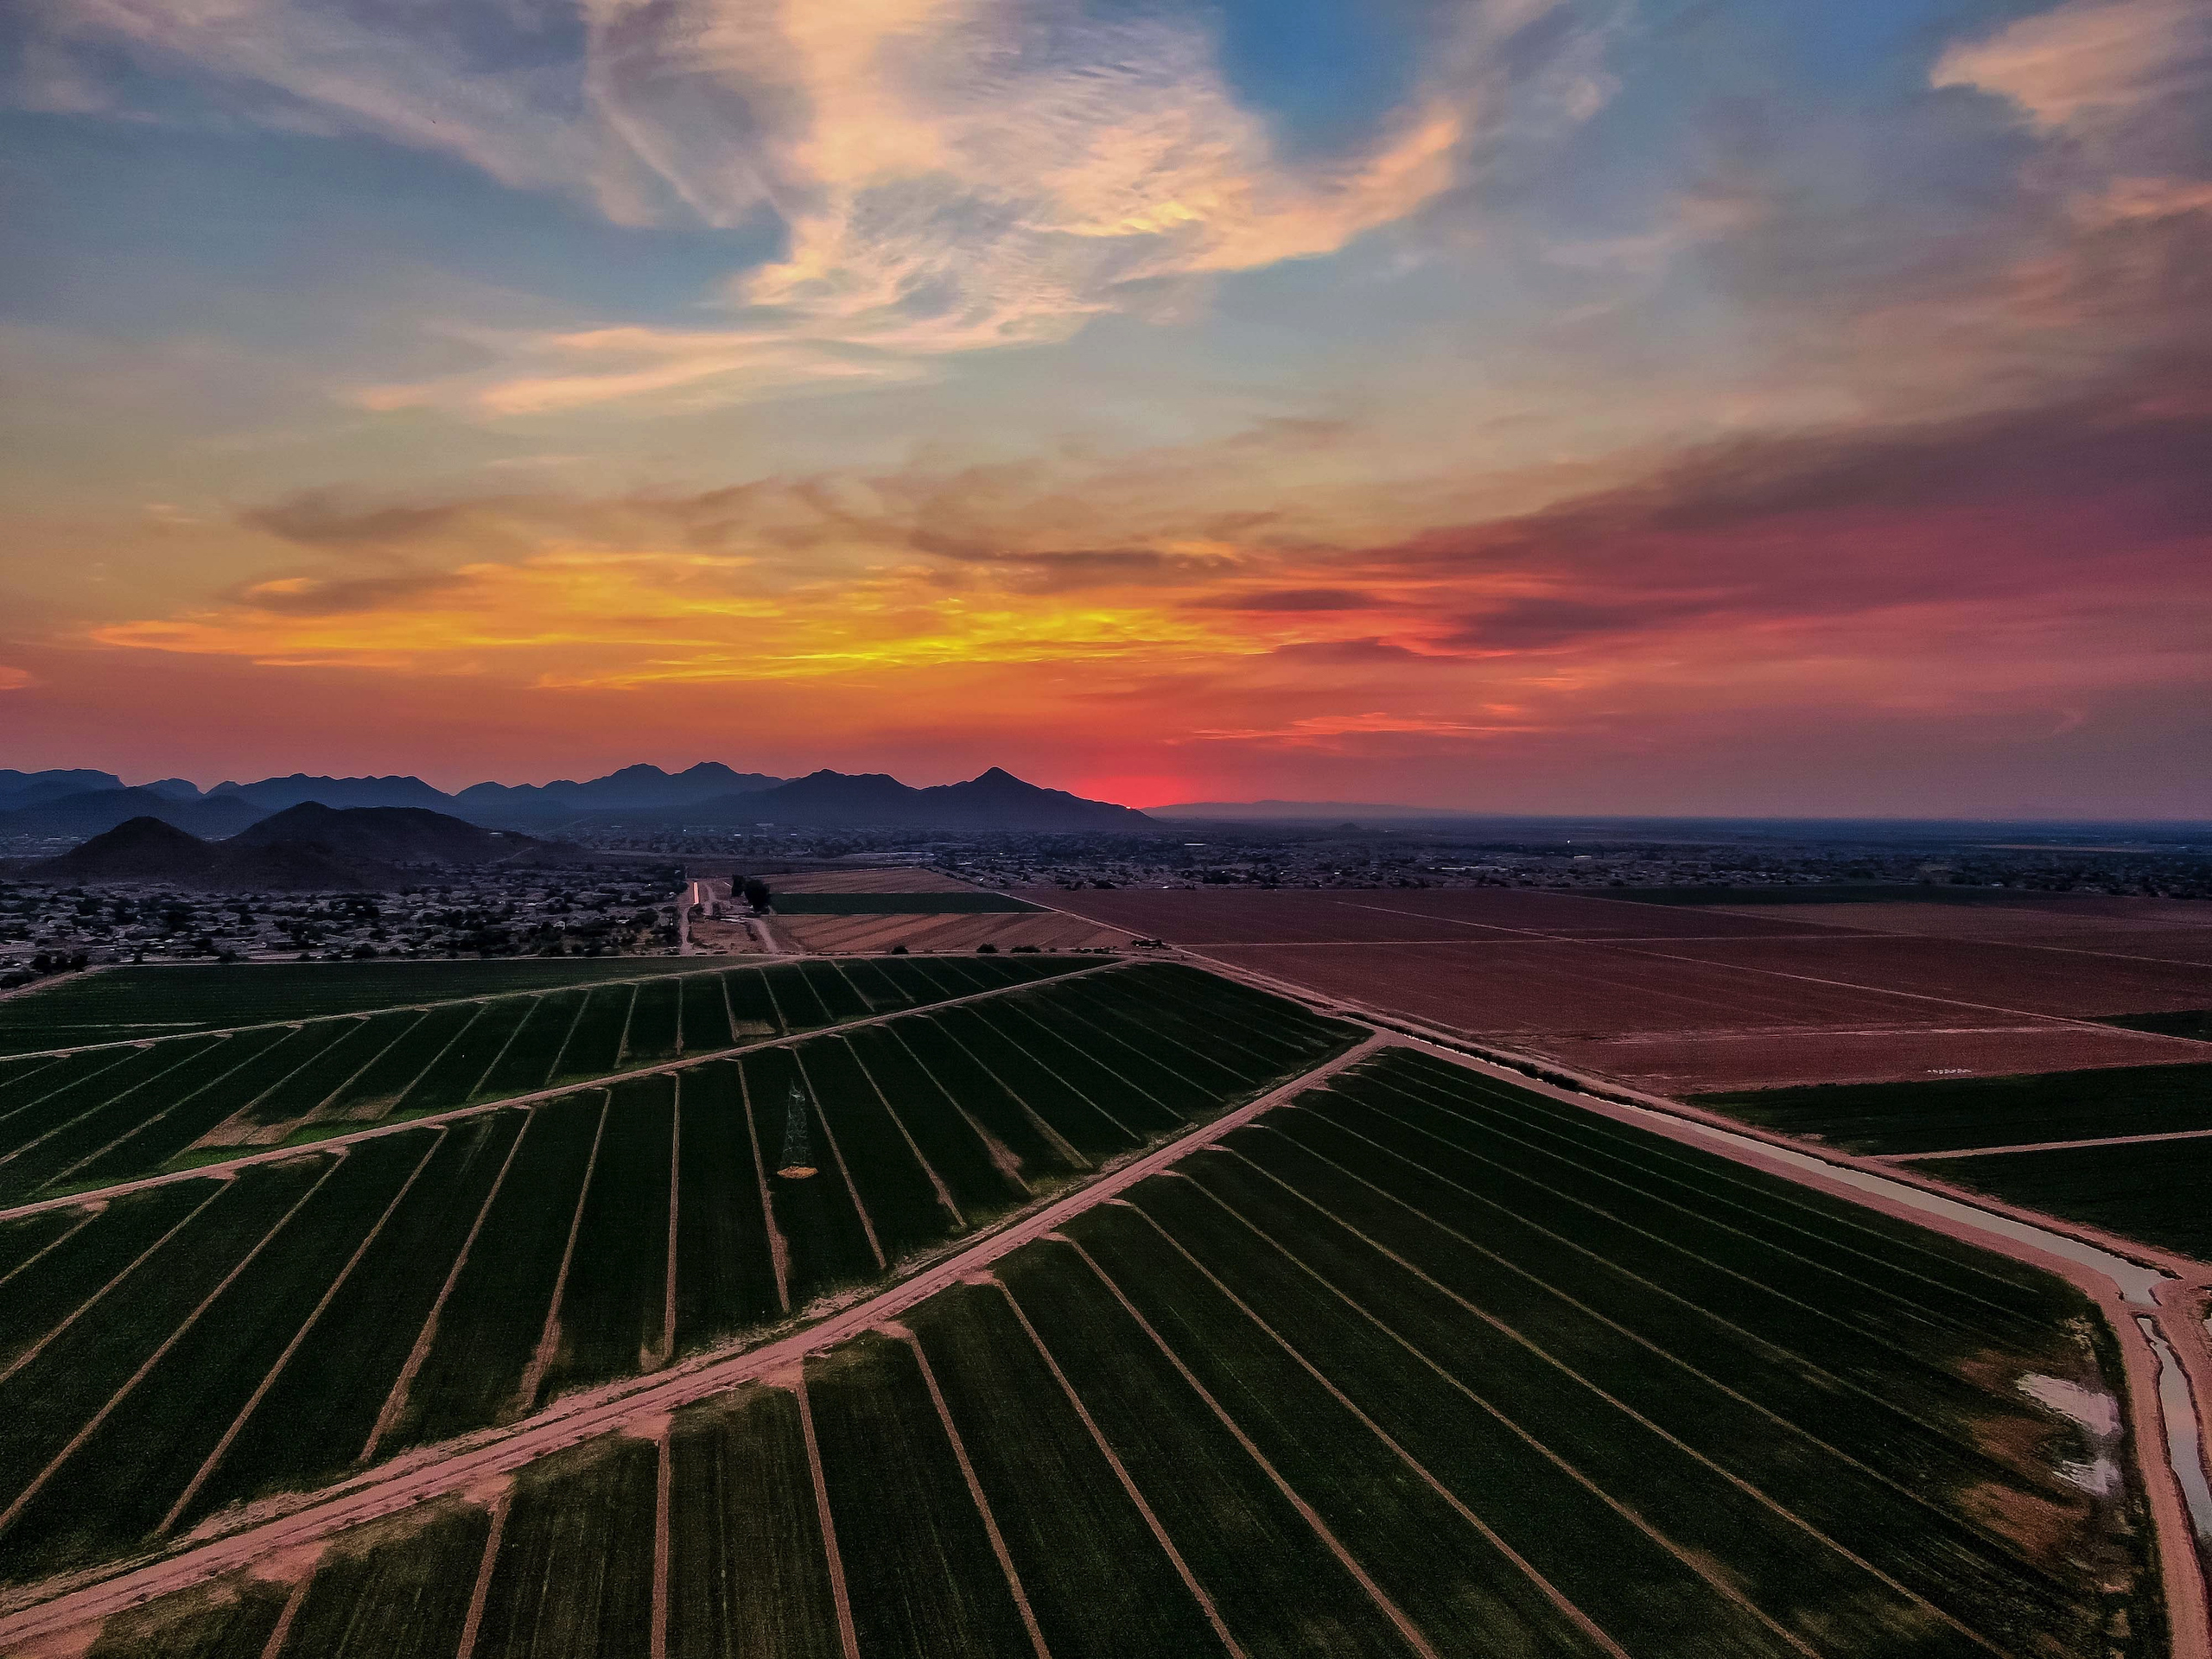 Aerial view over some farm fields in the suburbs of Phoenix, Arizona.